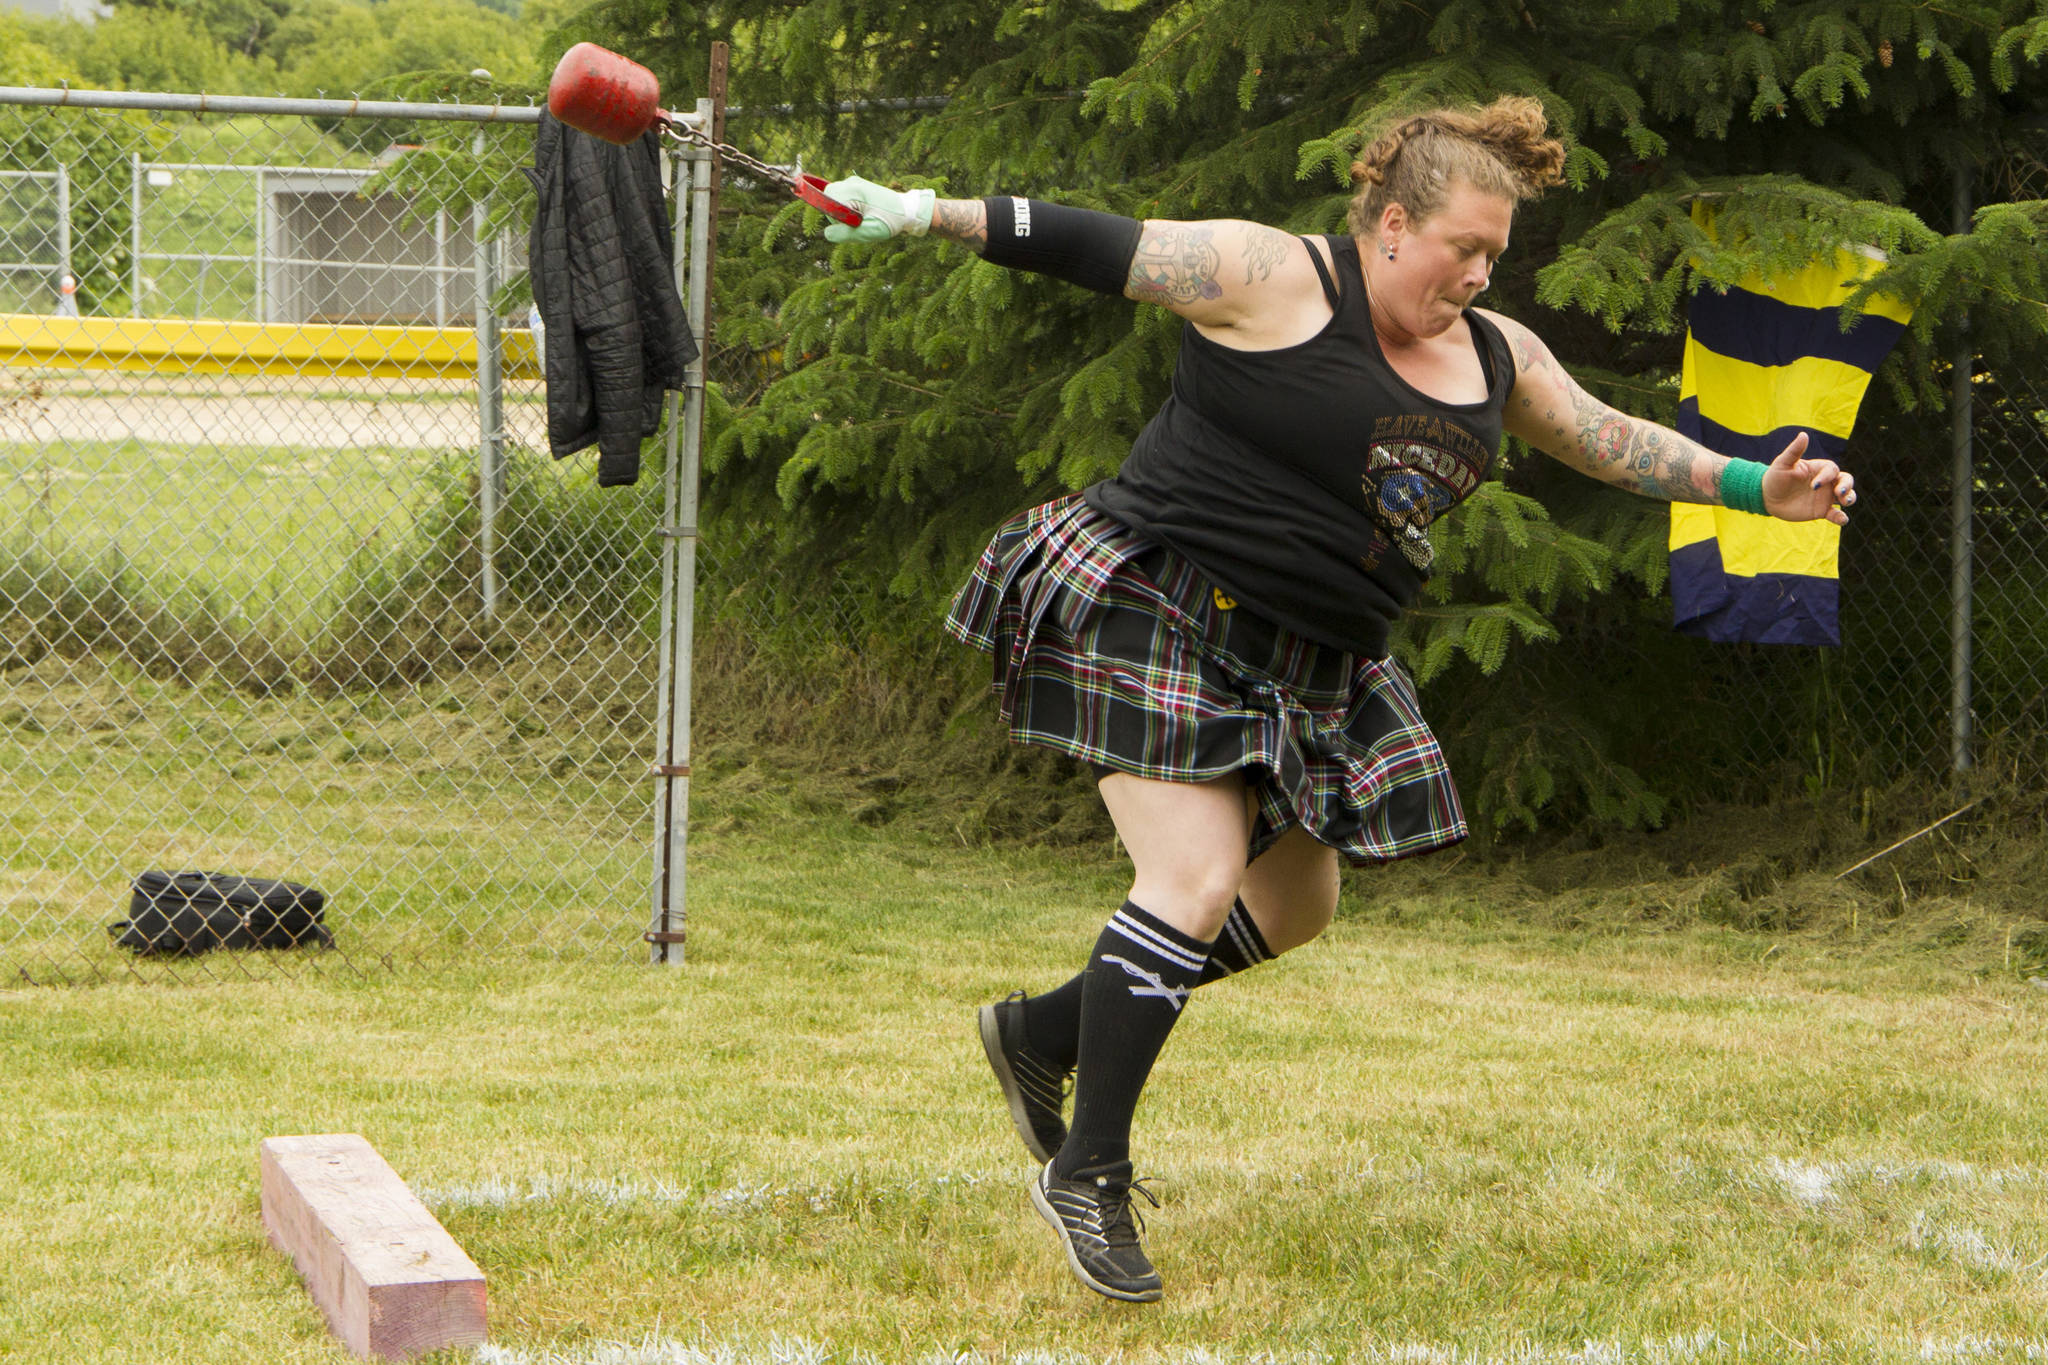 An athlete competes in the women’s heavy weight competition at the 2021 Kachemak Bay Highland Games on Saturday, July 3. (Photo by Sarah Knapp/Homer News)